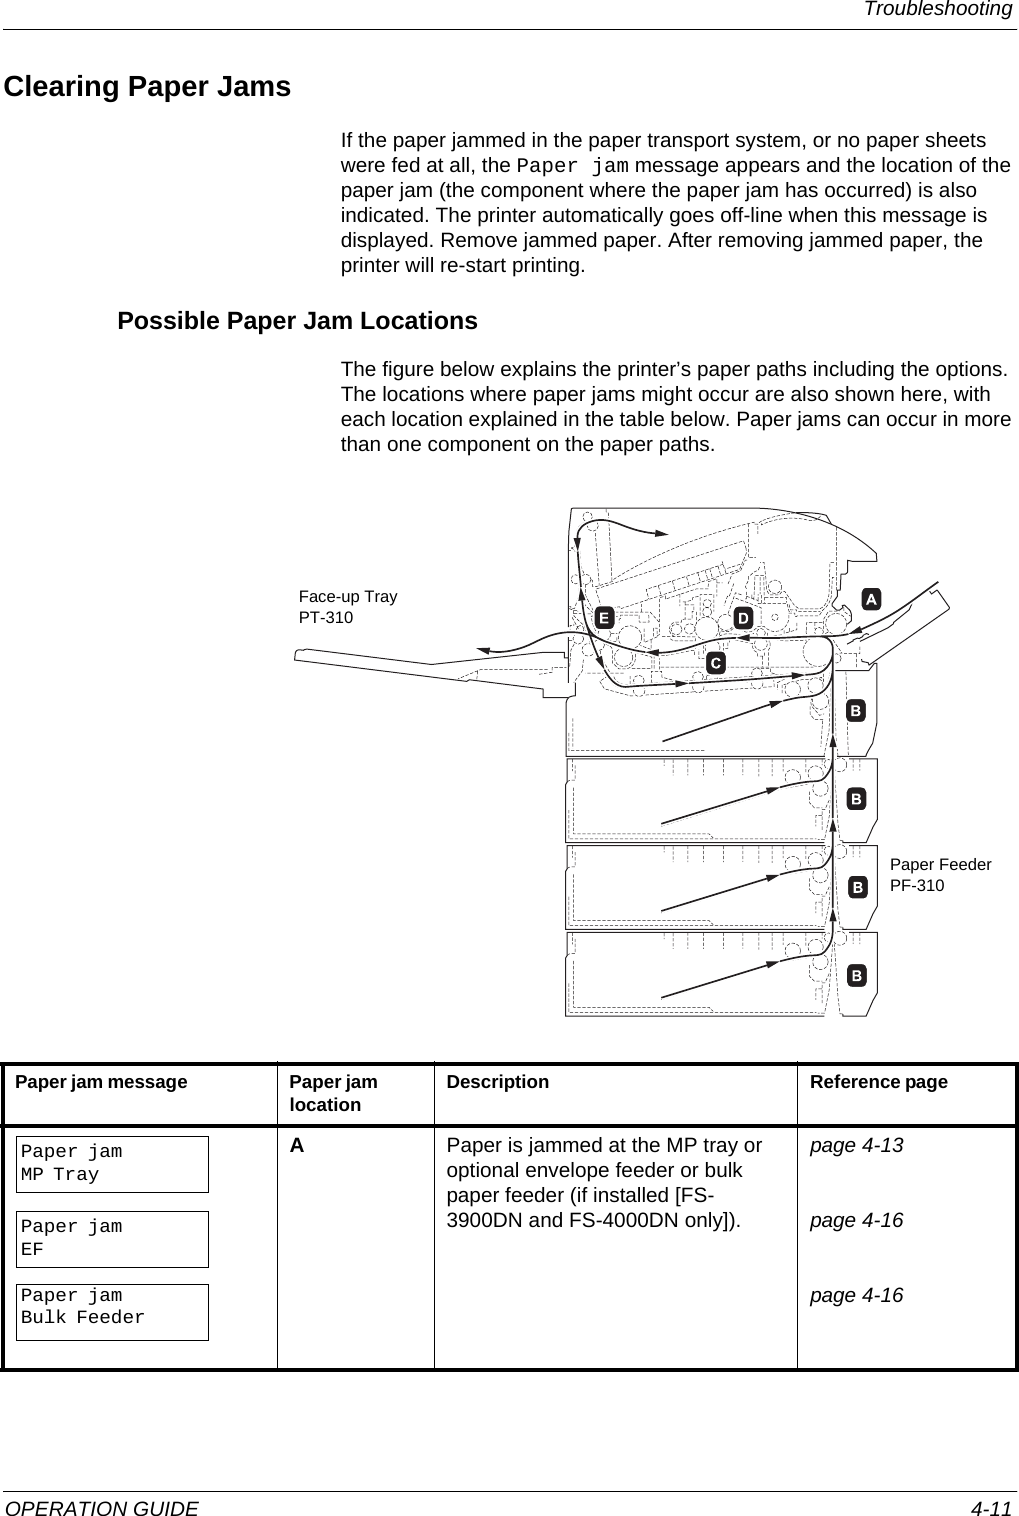 Troubleshooting OPERATION GUIDE 4-11Clearing Paper JamsIf the paper jammed in the paper transport system, or no paper sheets were fed at all, the Paper jam message appears and the location of the paper jam (the component where the paper jam has occurred) is also indicated. The printer automatically goes off-line when this message is displayed. Remove jammed paper. After removing jammed paper, the printer will re-start printing.Possible Paper Jam LocationsThe figure below explains the printer’s paper paths including the options. The locations where paper jams might occur are also shown here, with each location explained in the table below. Paper jams can occur in more than one component on the paper paths.Paper jam message Paper jam location Description Reference pagePaper jamMP TrayPaper jamEFPaper jamBulk FeederAPaper is jammed at the MP tray or optional envelope feeder or bulk paper feeder (if installed [FS-3900DN and FS-4000DN only]).page 4-13page 4-16page 4-16Paper FeederPF-310Face-up TrayPT-310